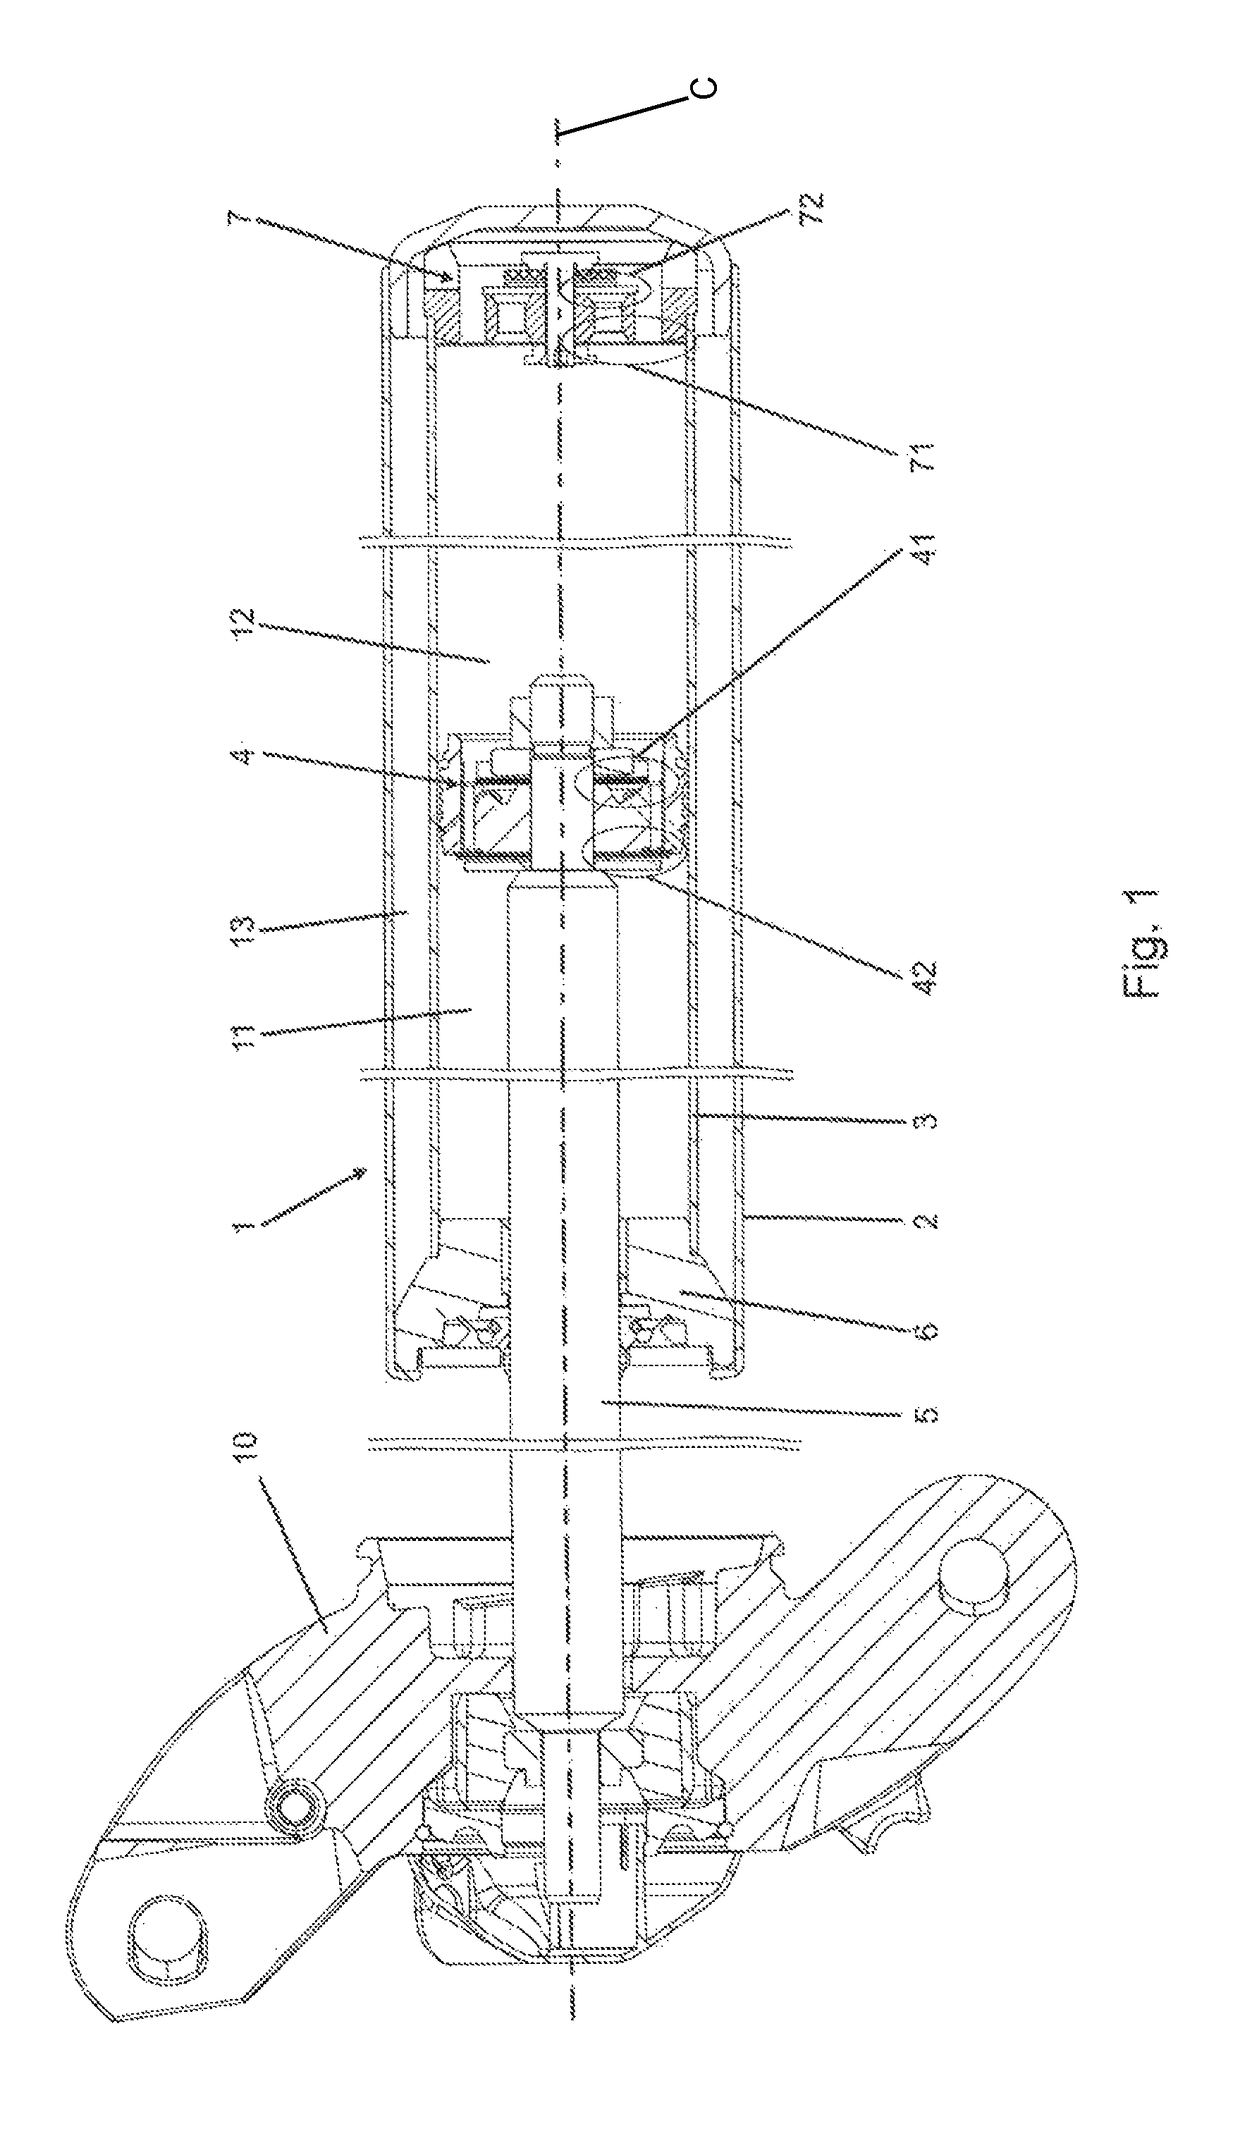 Twin-tube hydraulic damper with a vibration suppressing device